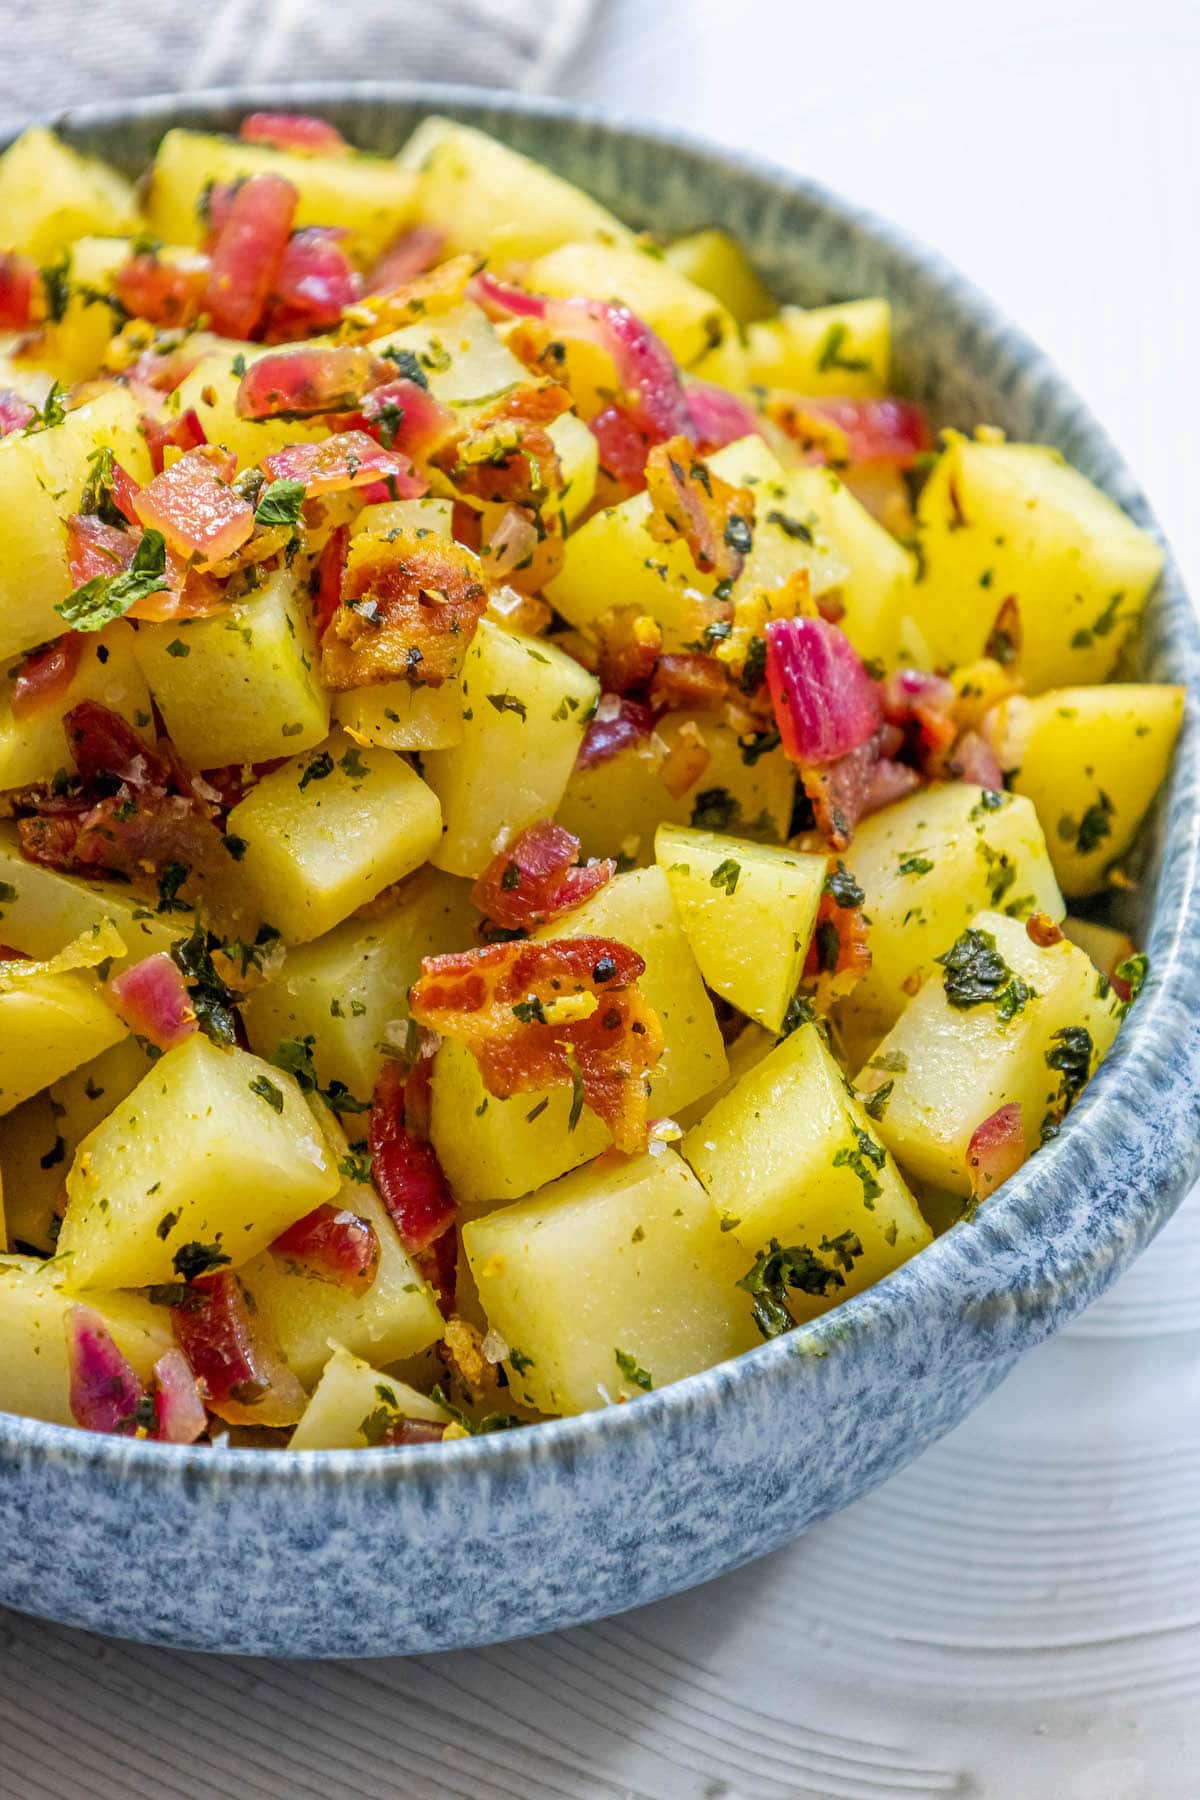 picture of german potato salad with red onions, herbs, and bacon on top in a blue bowl on a table